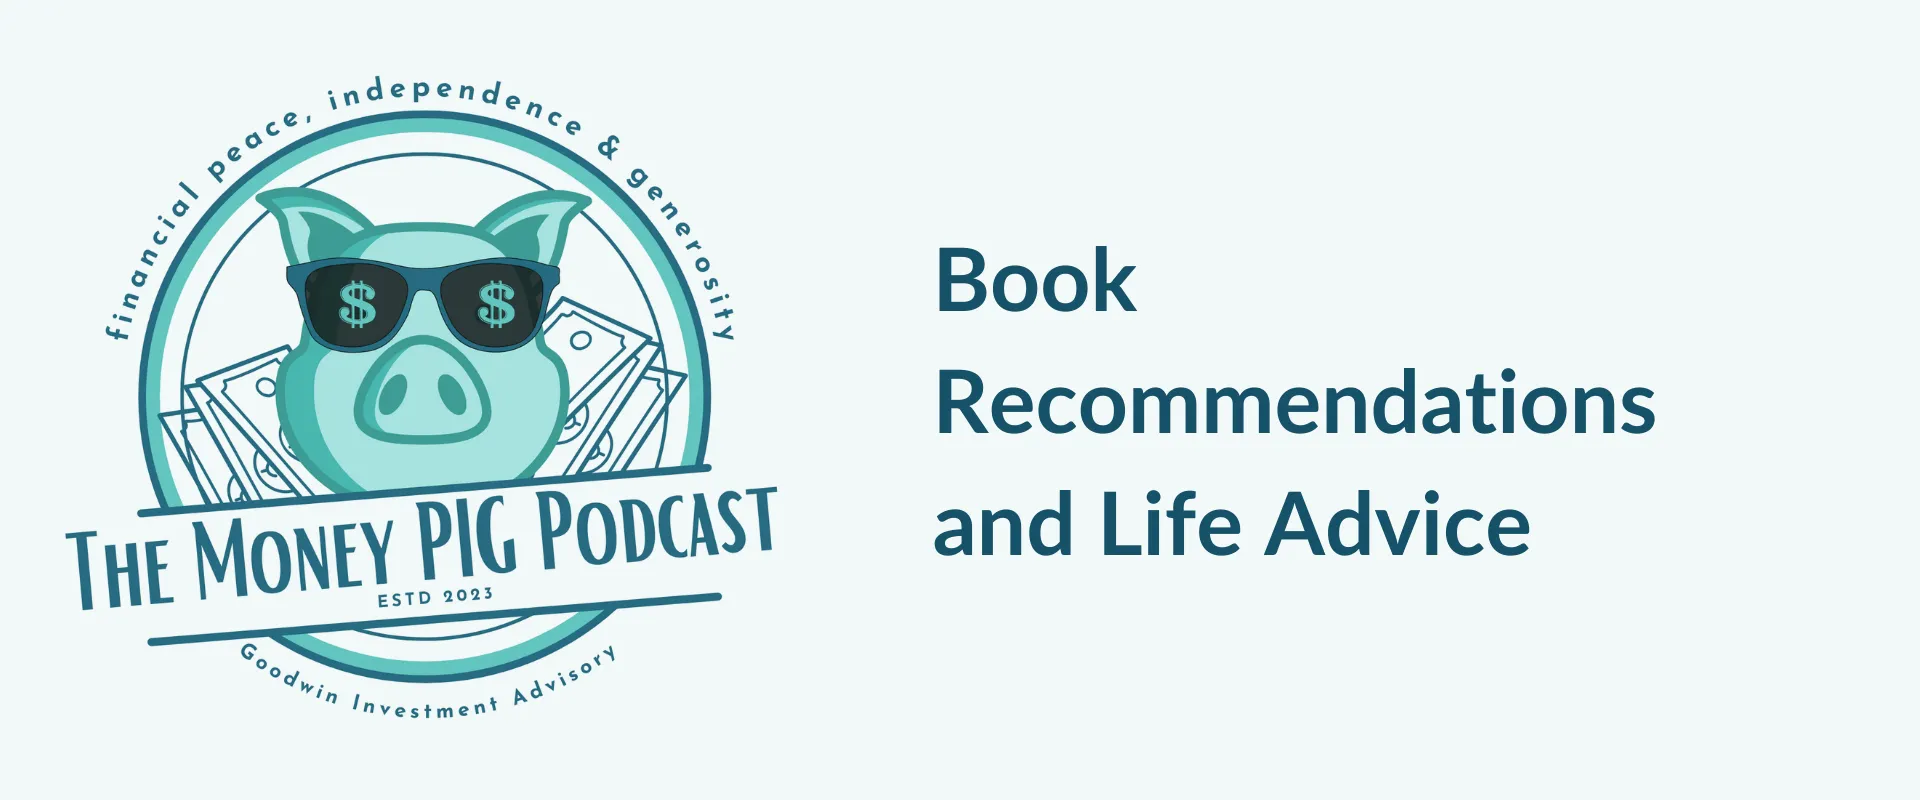 Book Recommendations and Life Advice with Dale Alexander (part 2)